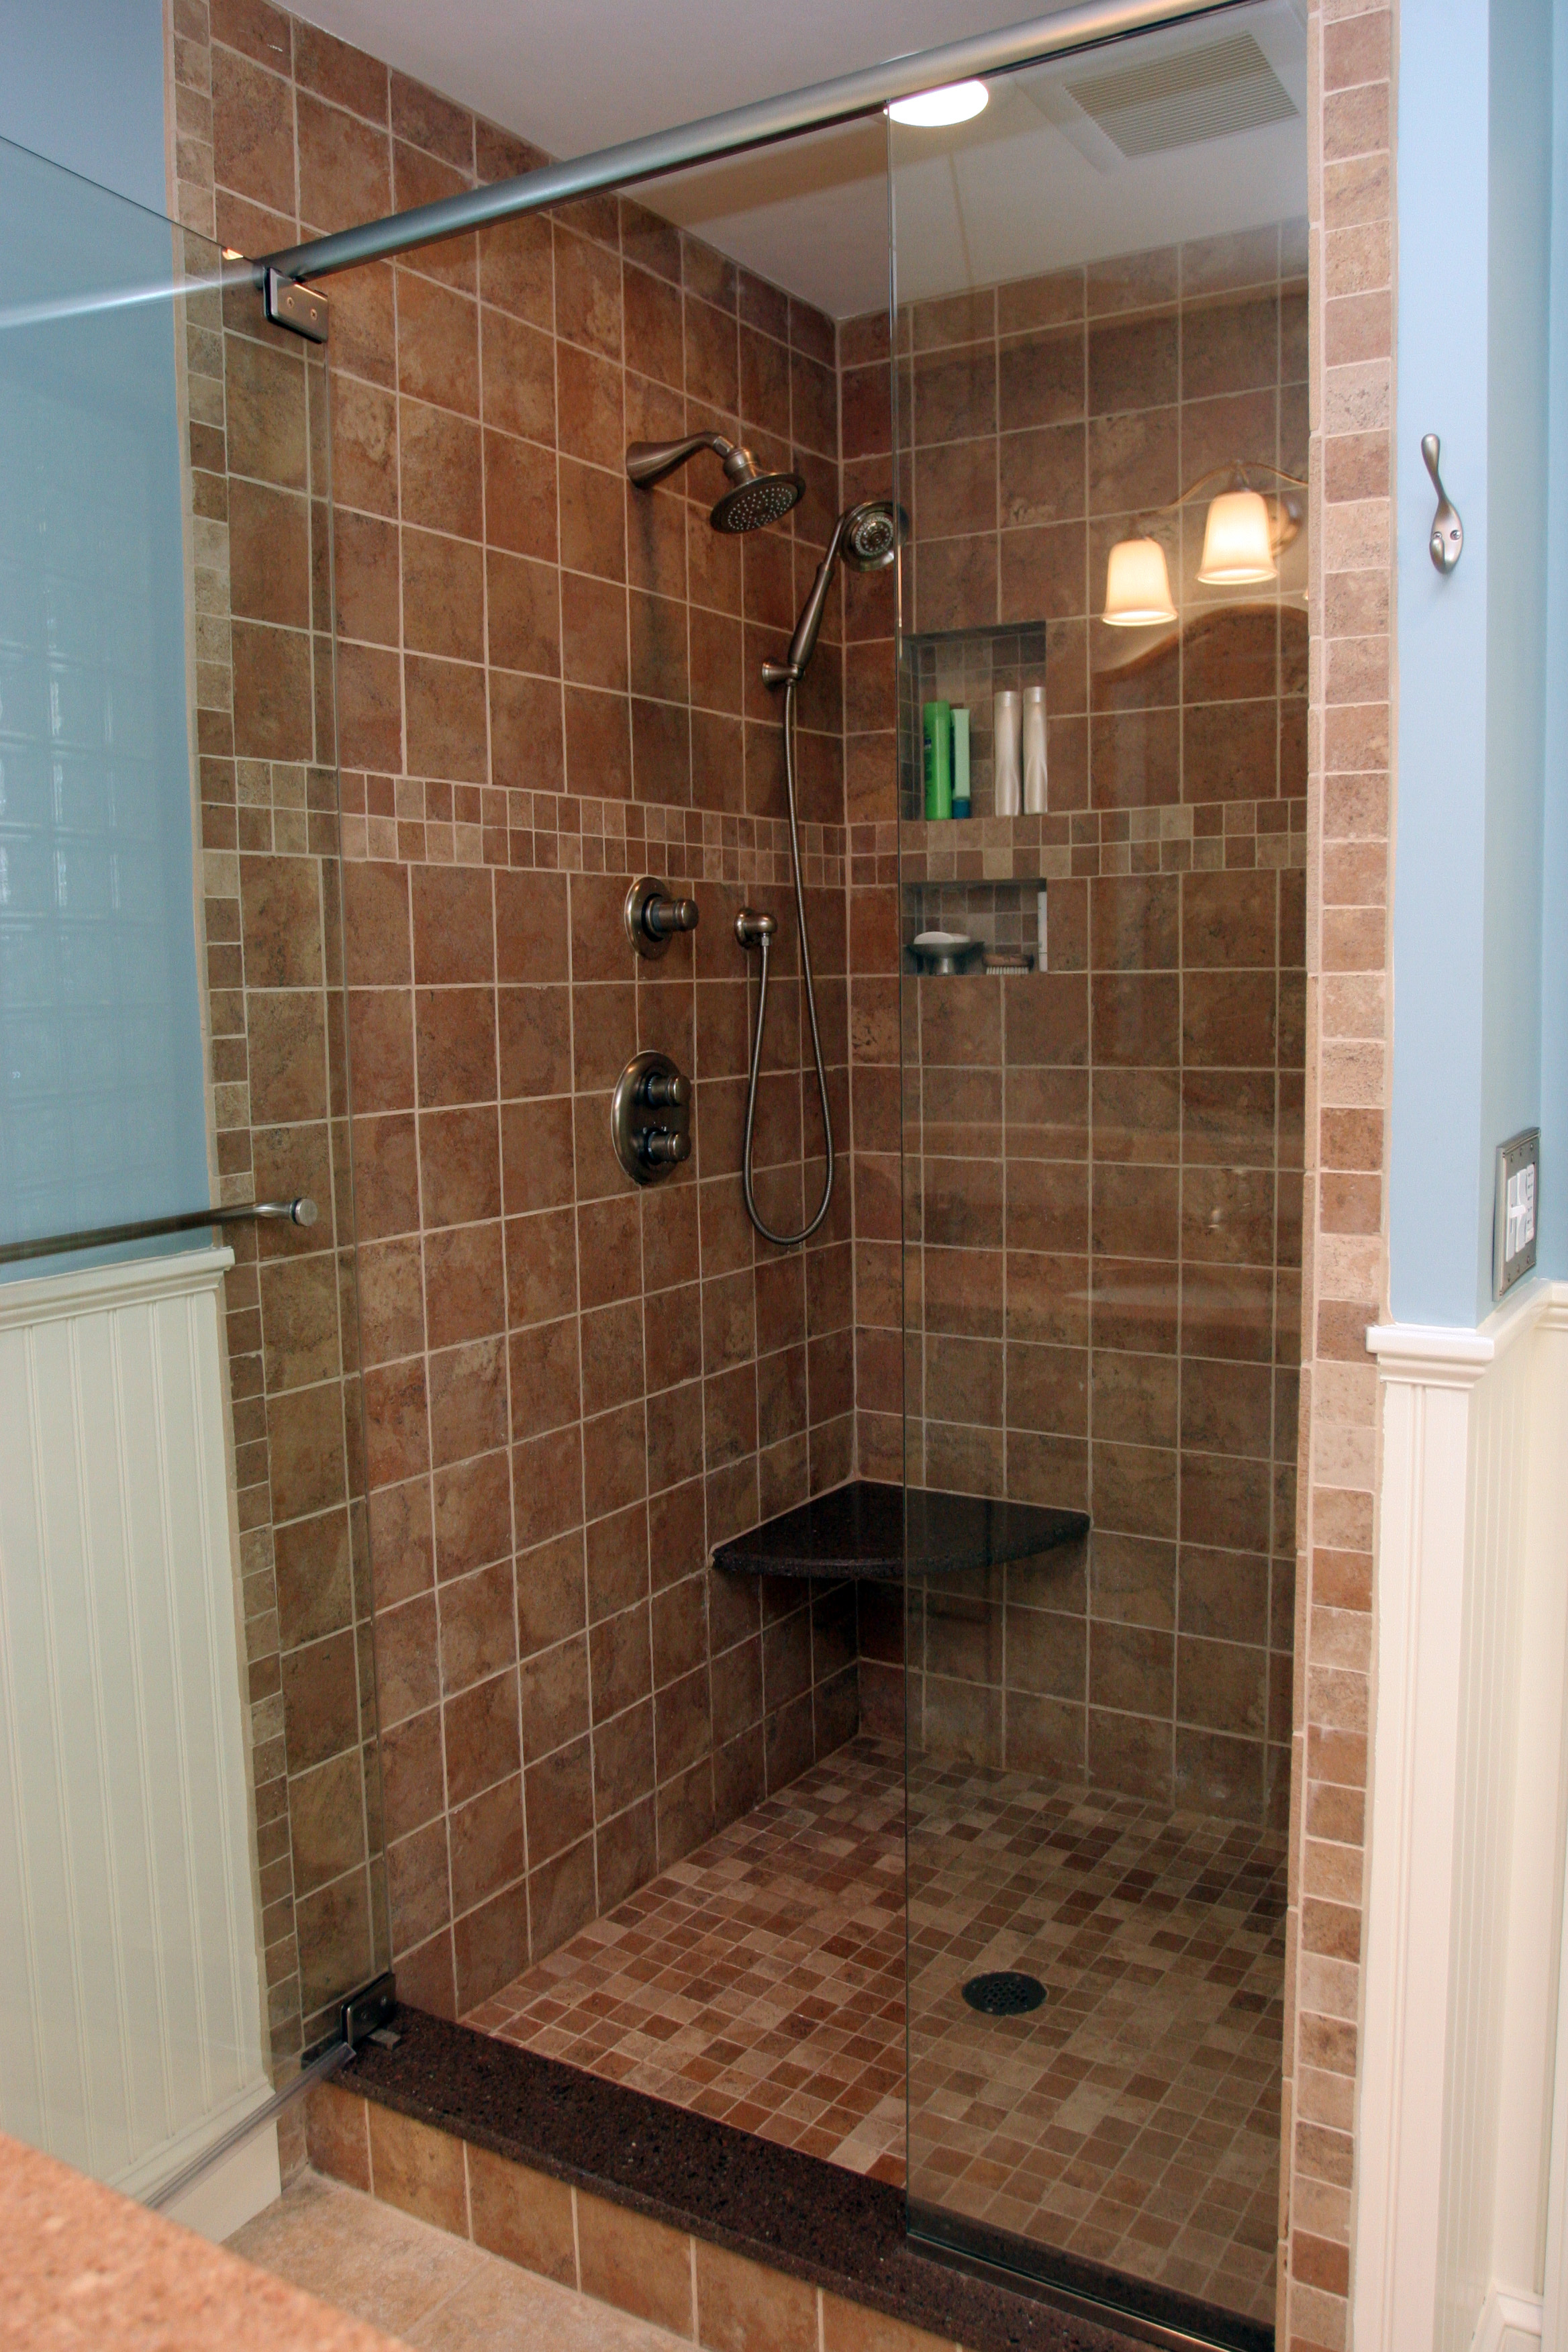 AFTER: A TILE SHOWER WITH GLASS DOOR